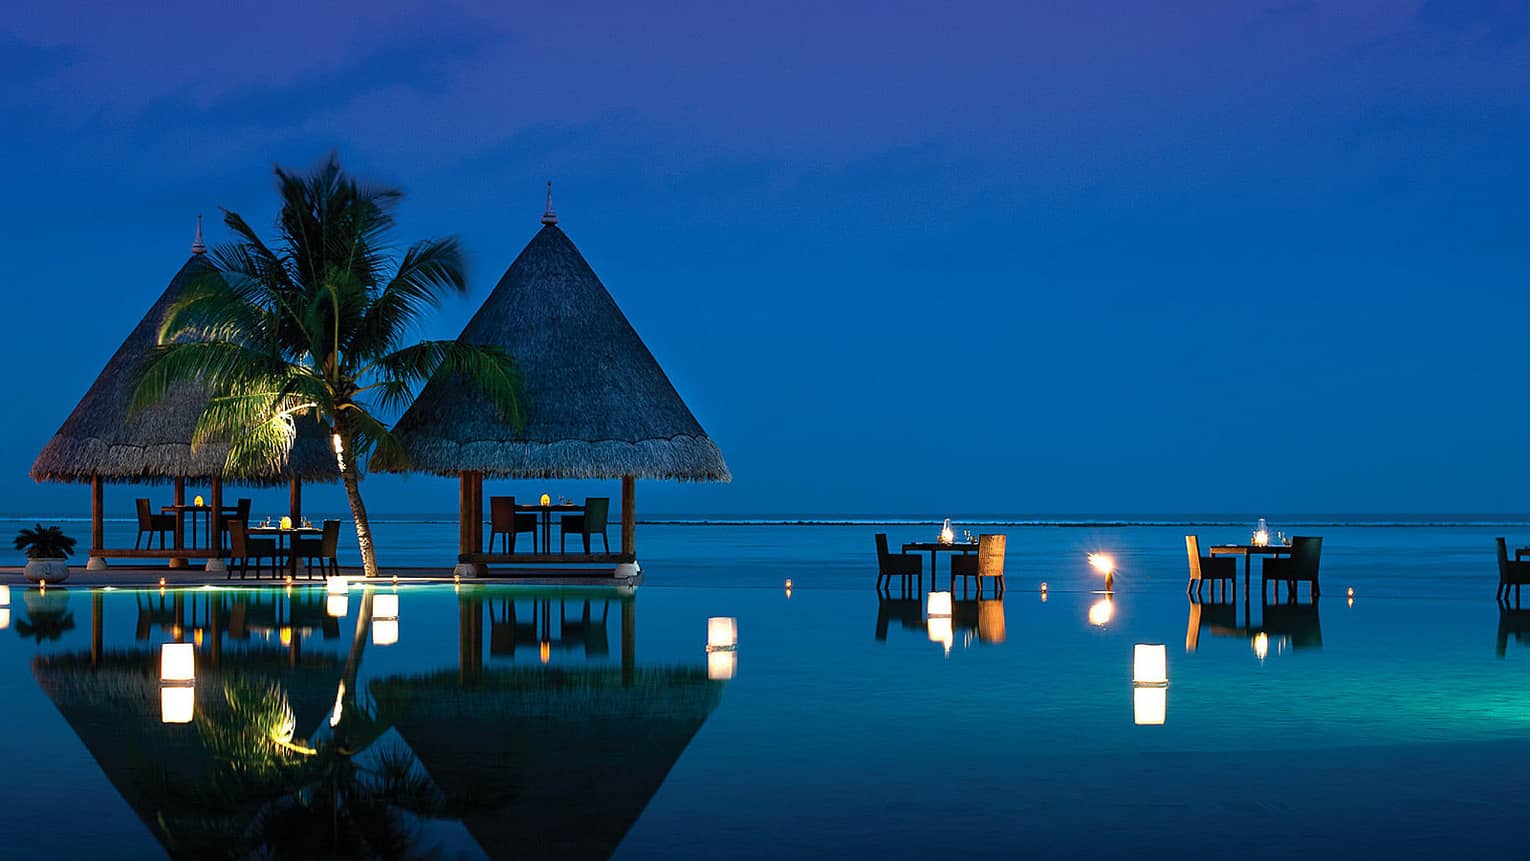 Kandu Grill at night, with candlelit dining tables under a towering palm, perched on ocean and infinity pool